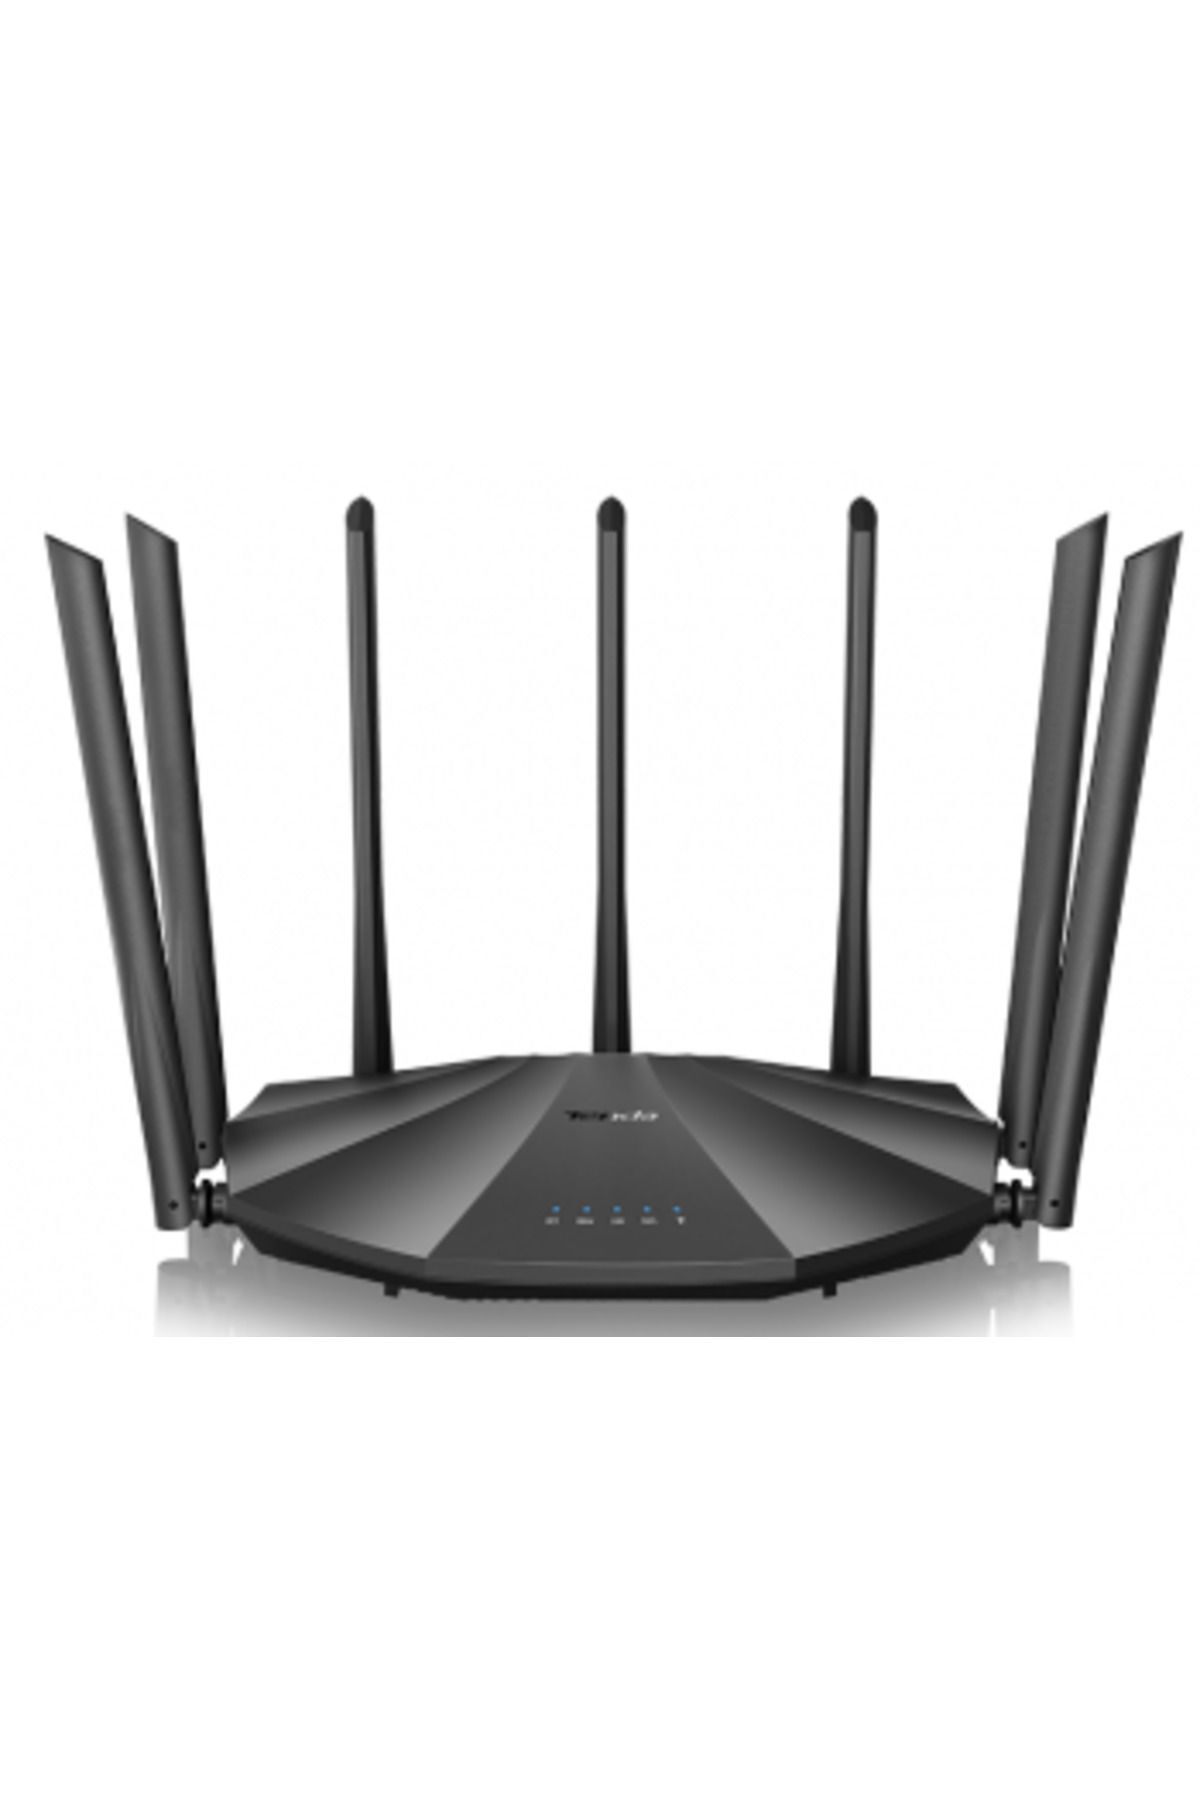 Tenda Ac23 2.4/5 Ghz 2033 Mbps Ac2100 Dual Band Router